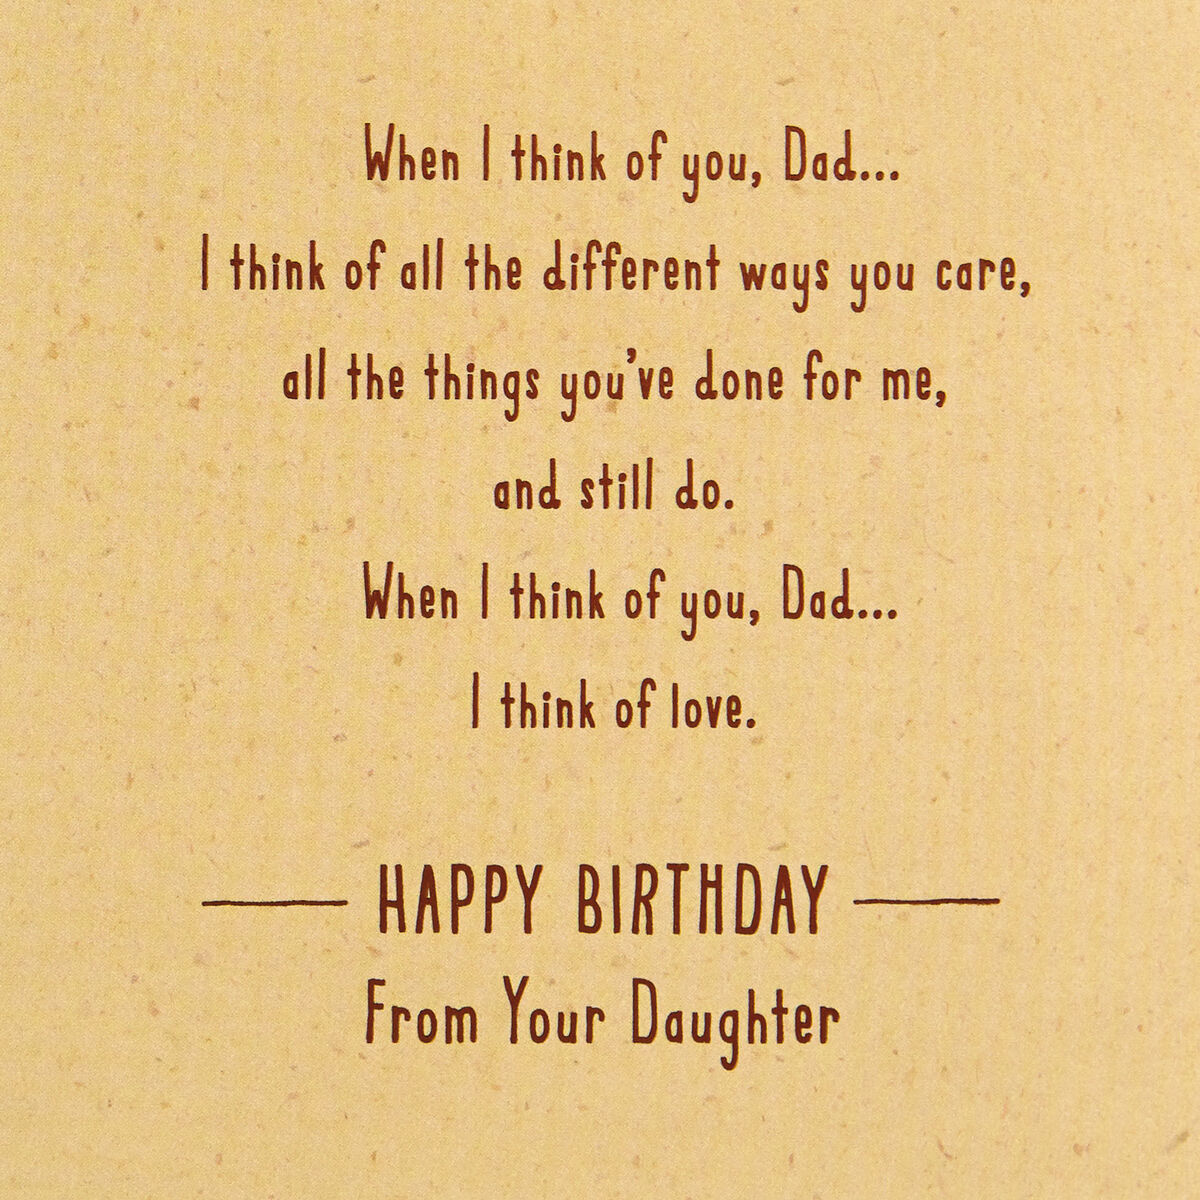 Free Printable Birthday Cards For Dad From Daughter